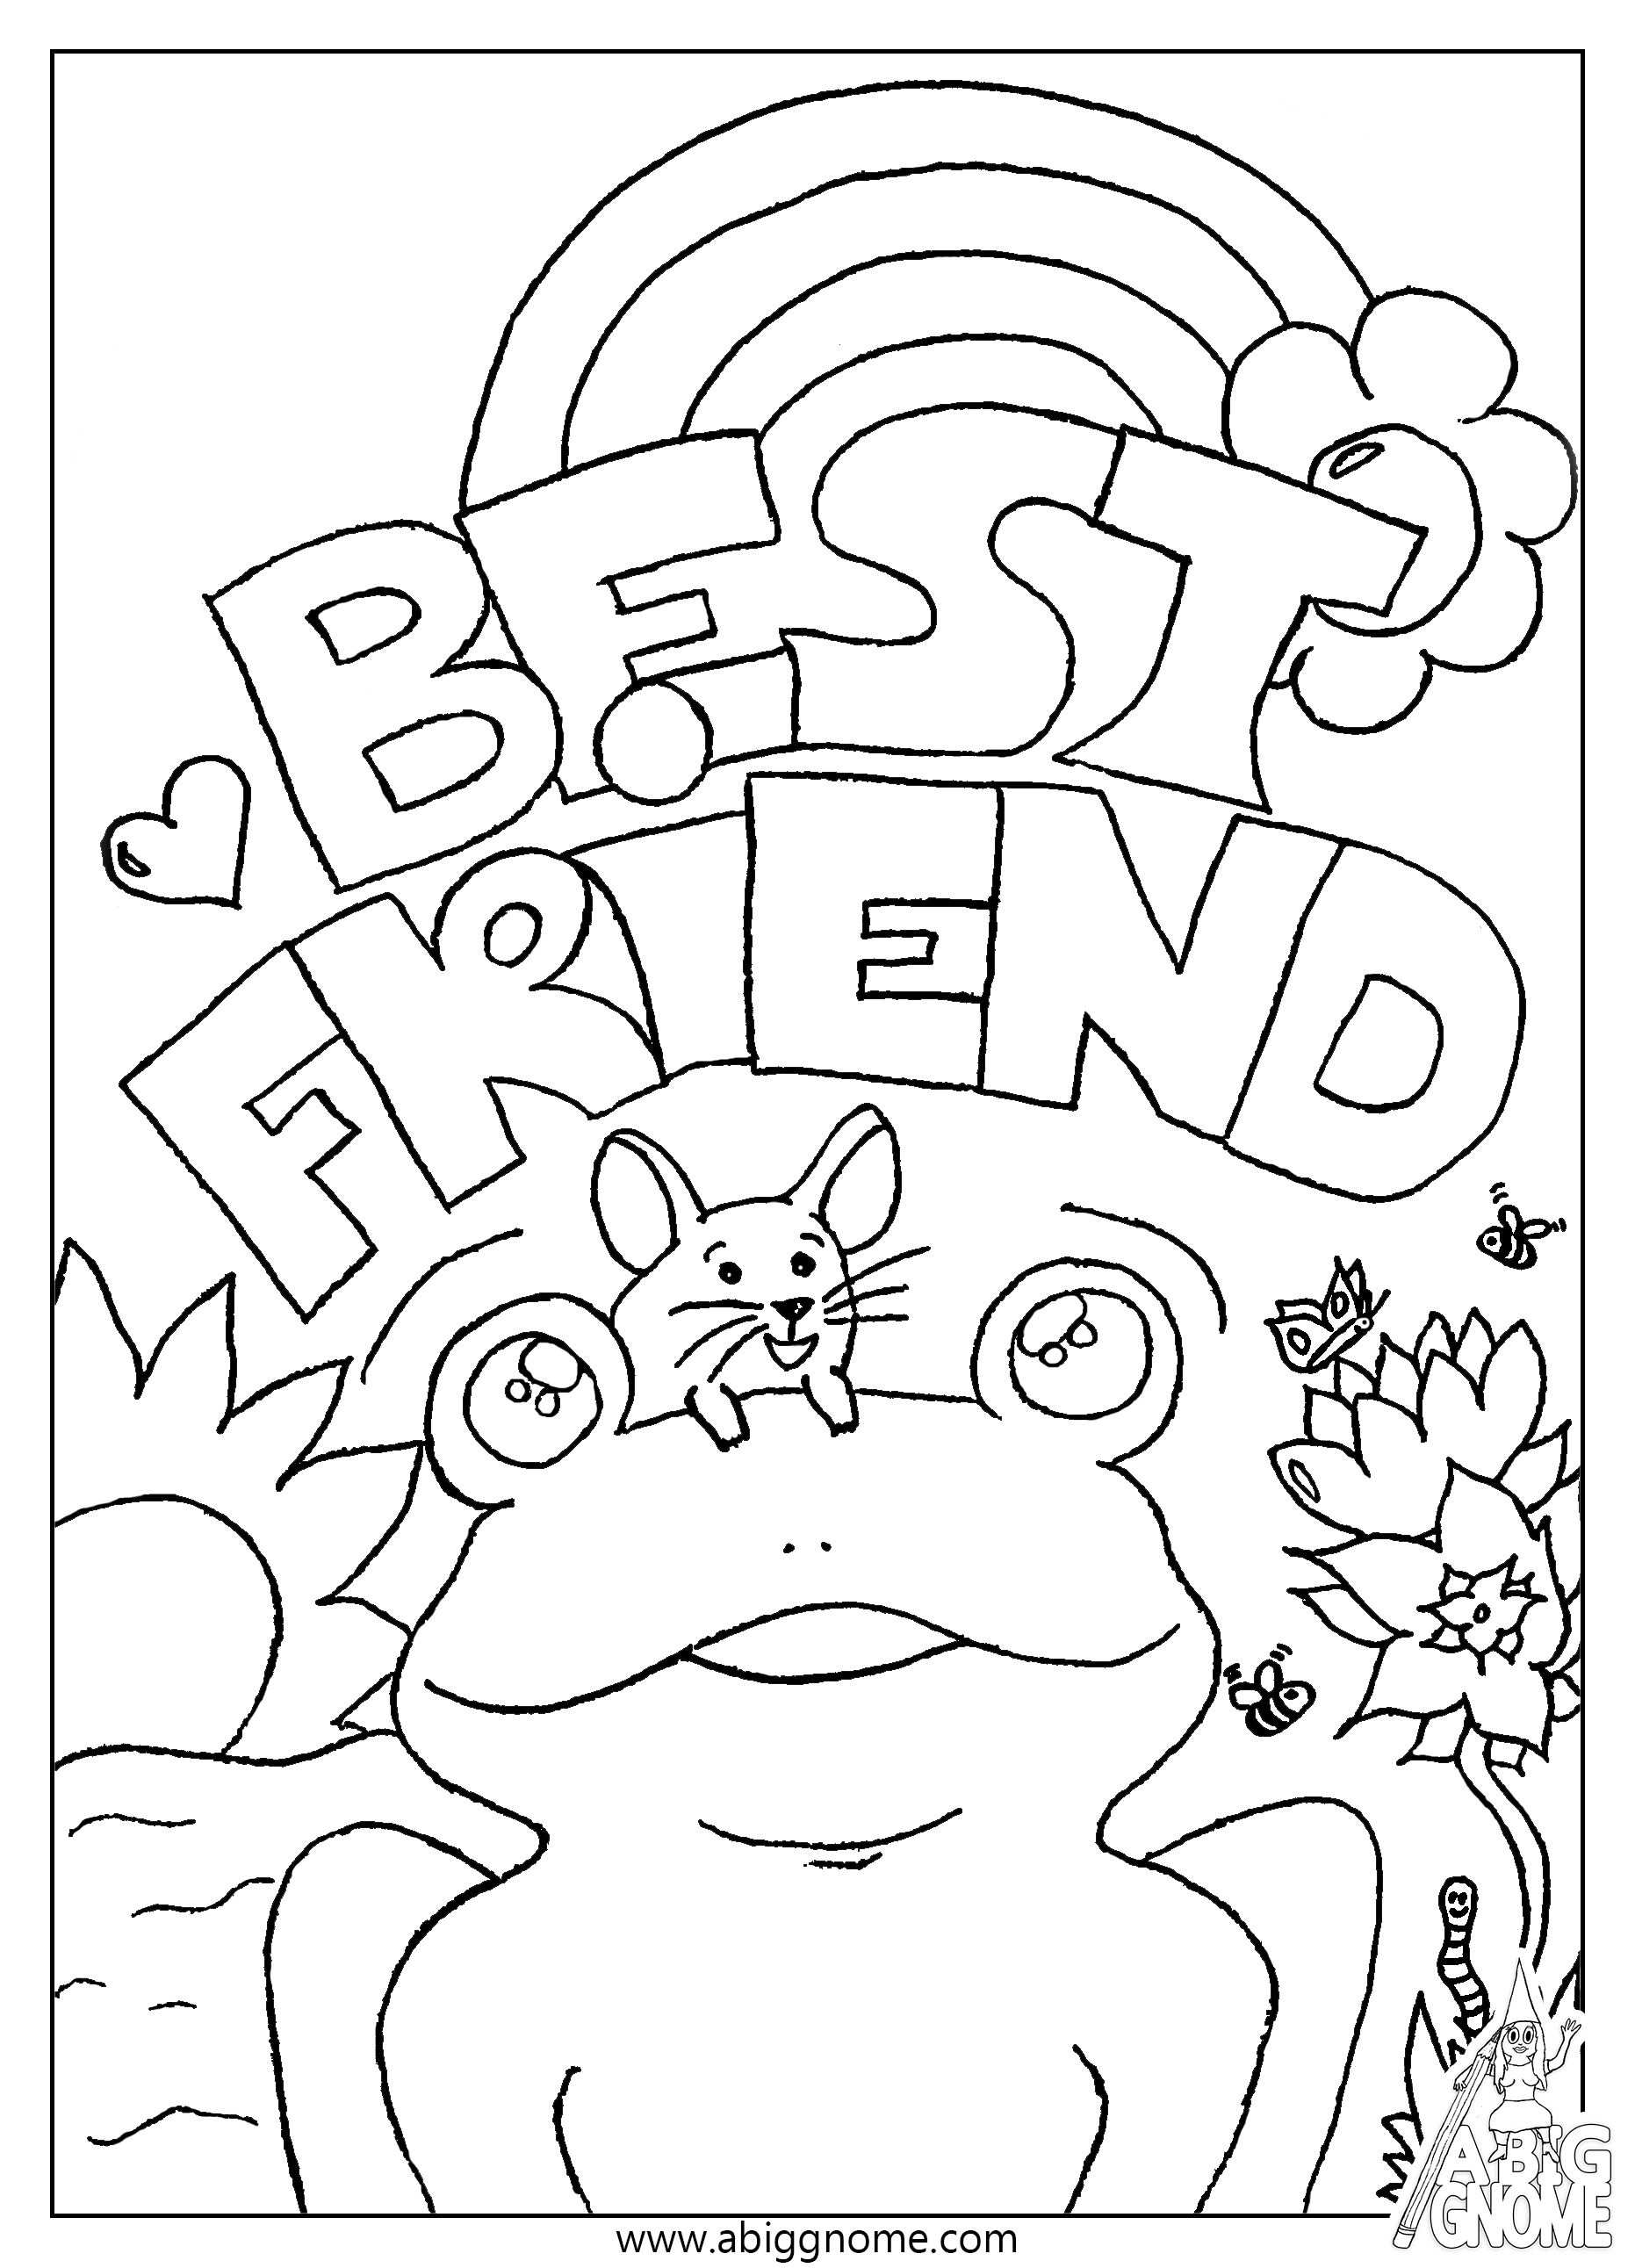 Kleurplaten With Images Coloring Pages Cute Coloring Pages